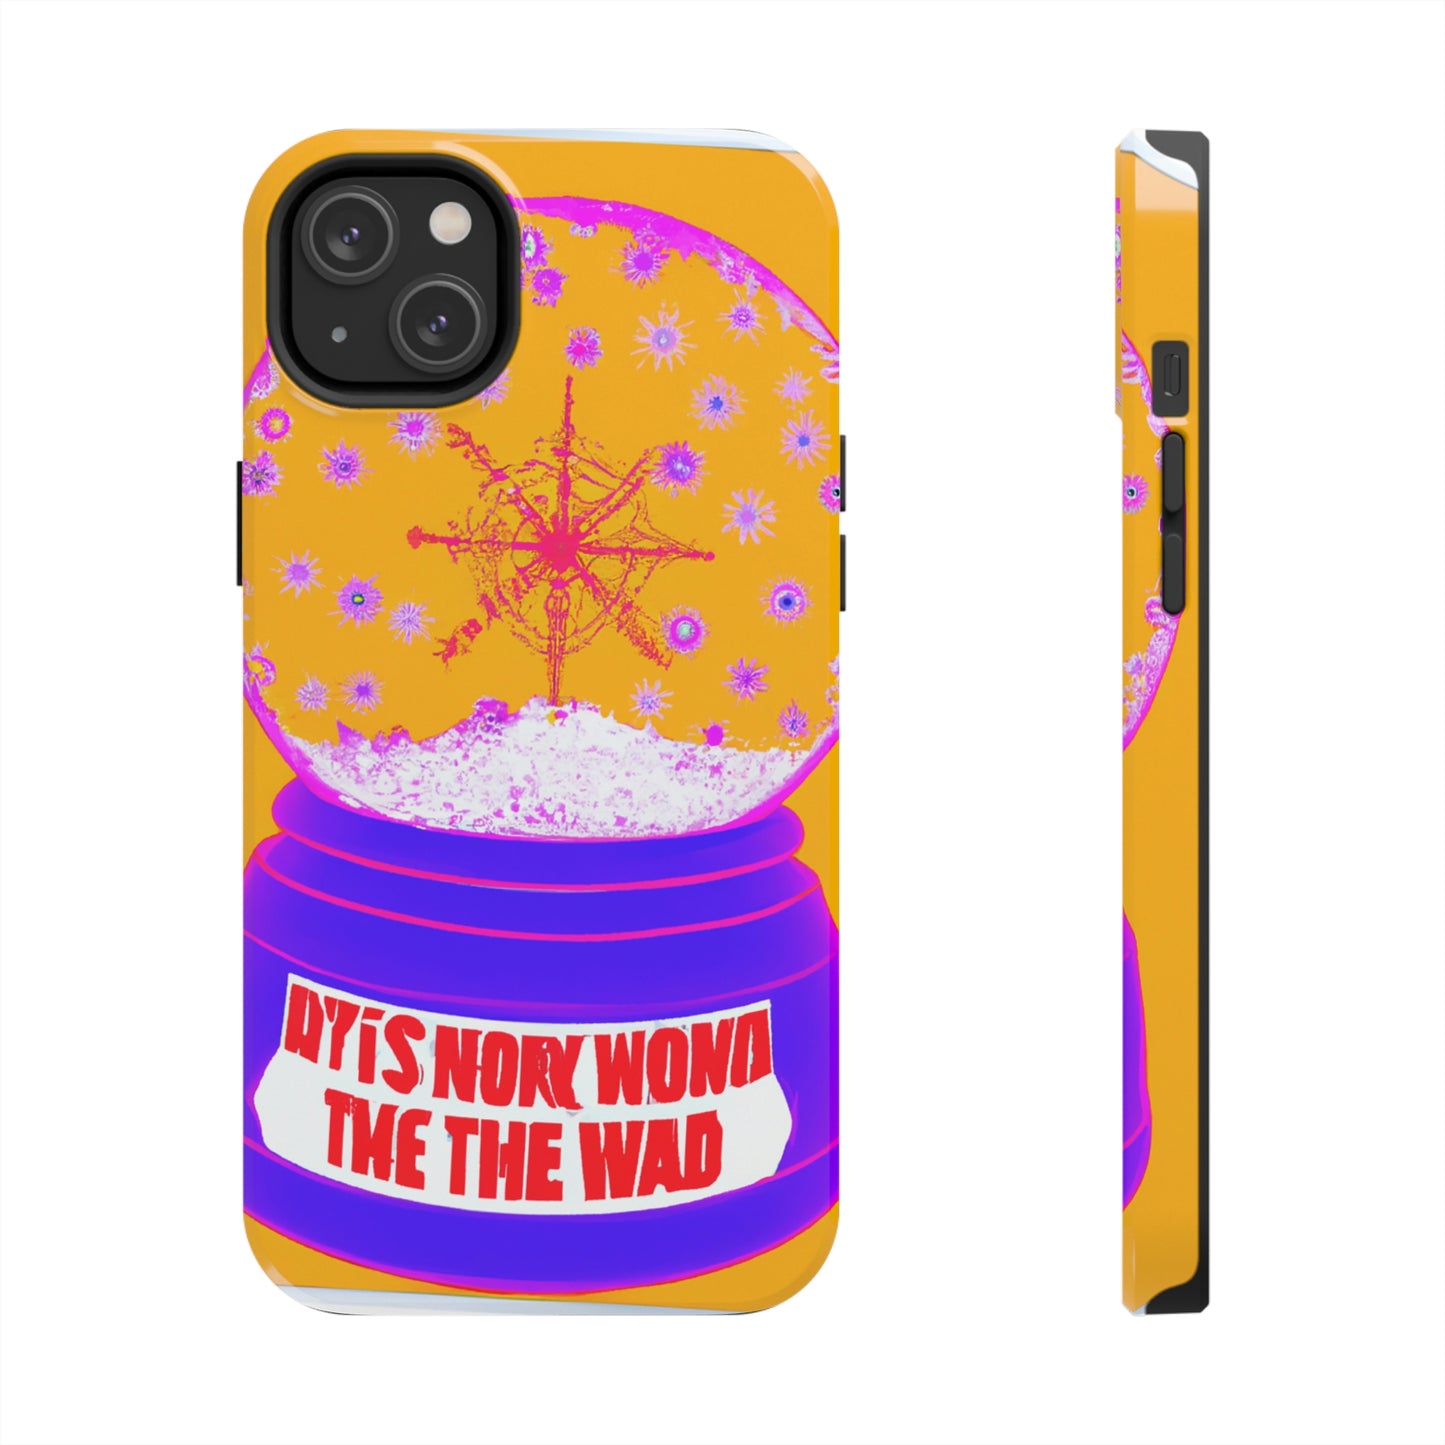 "Wish Upon A Snow Globe: A Never-Ending Wonder" - The Alien Tough Phone Cases